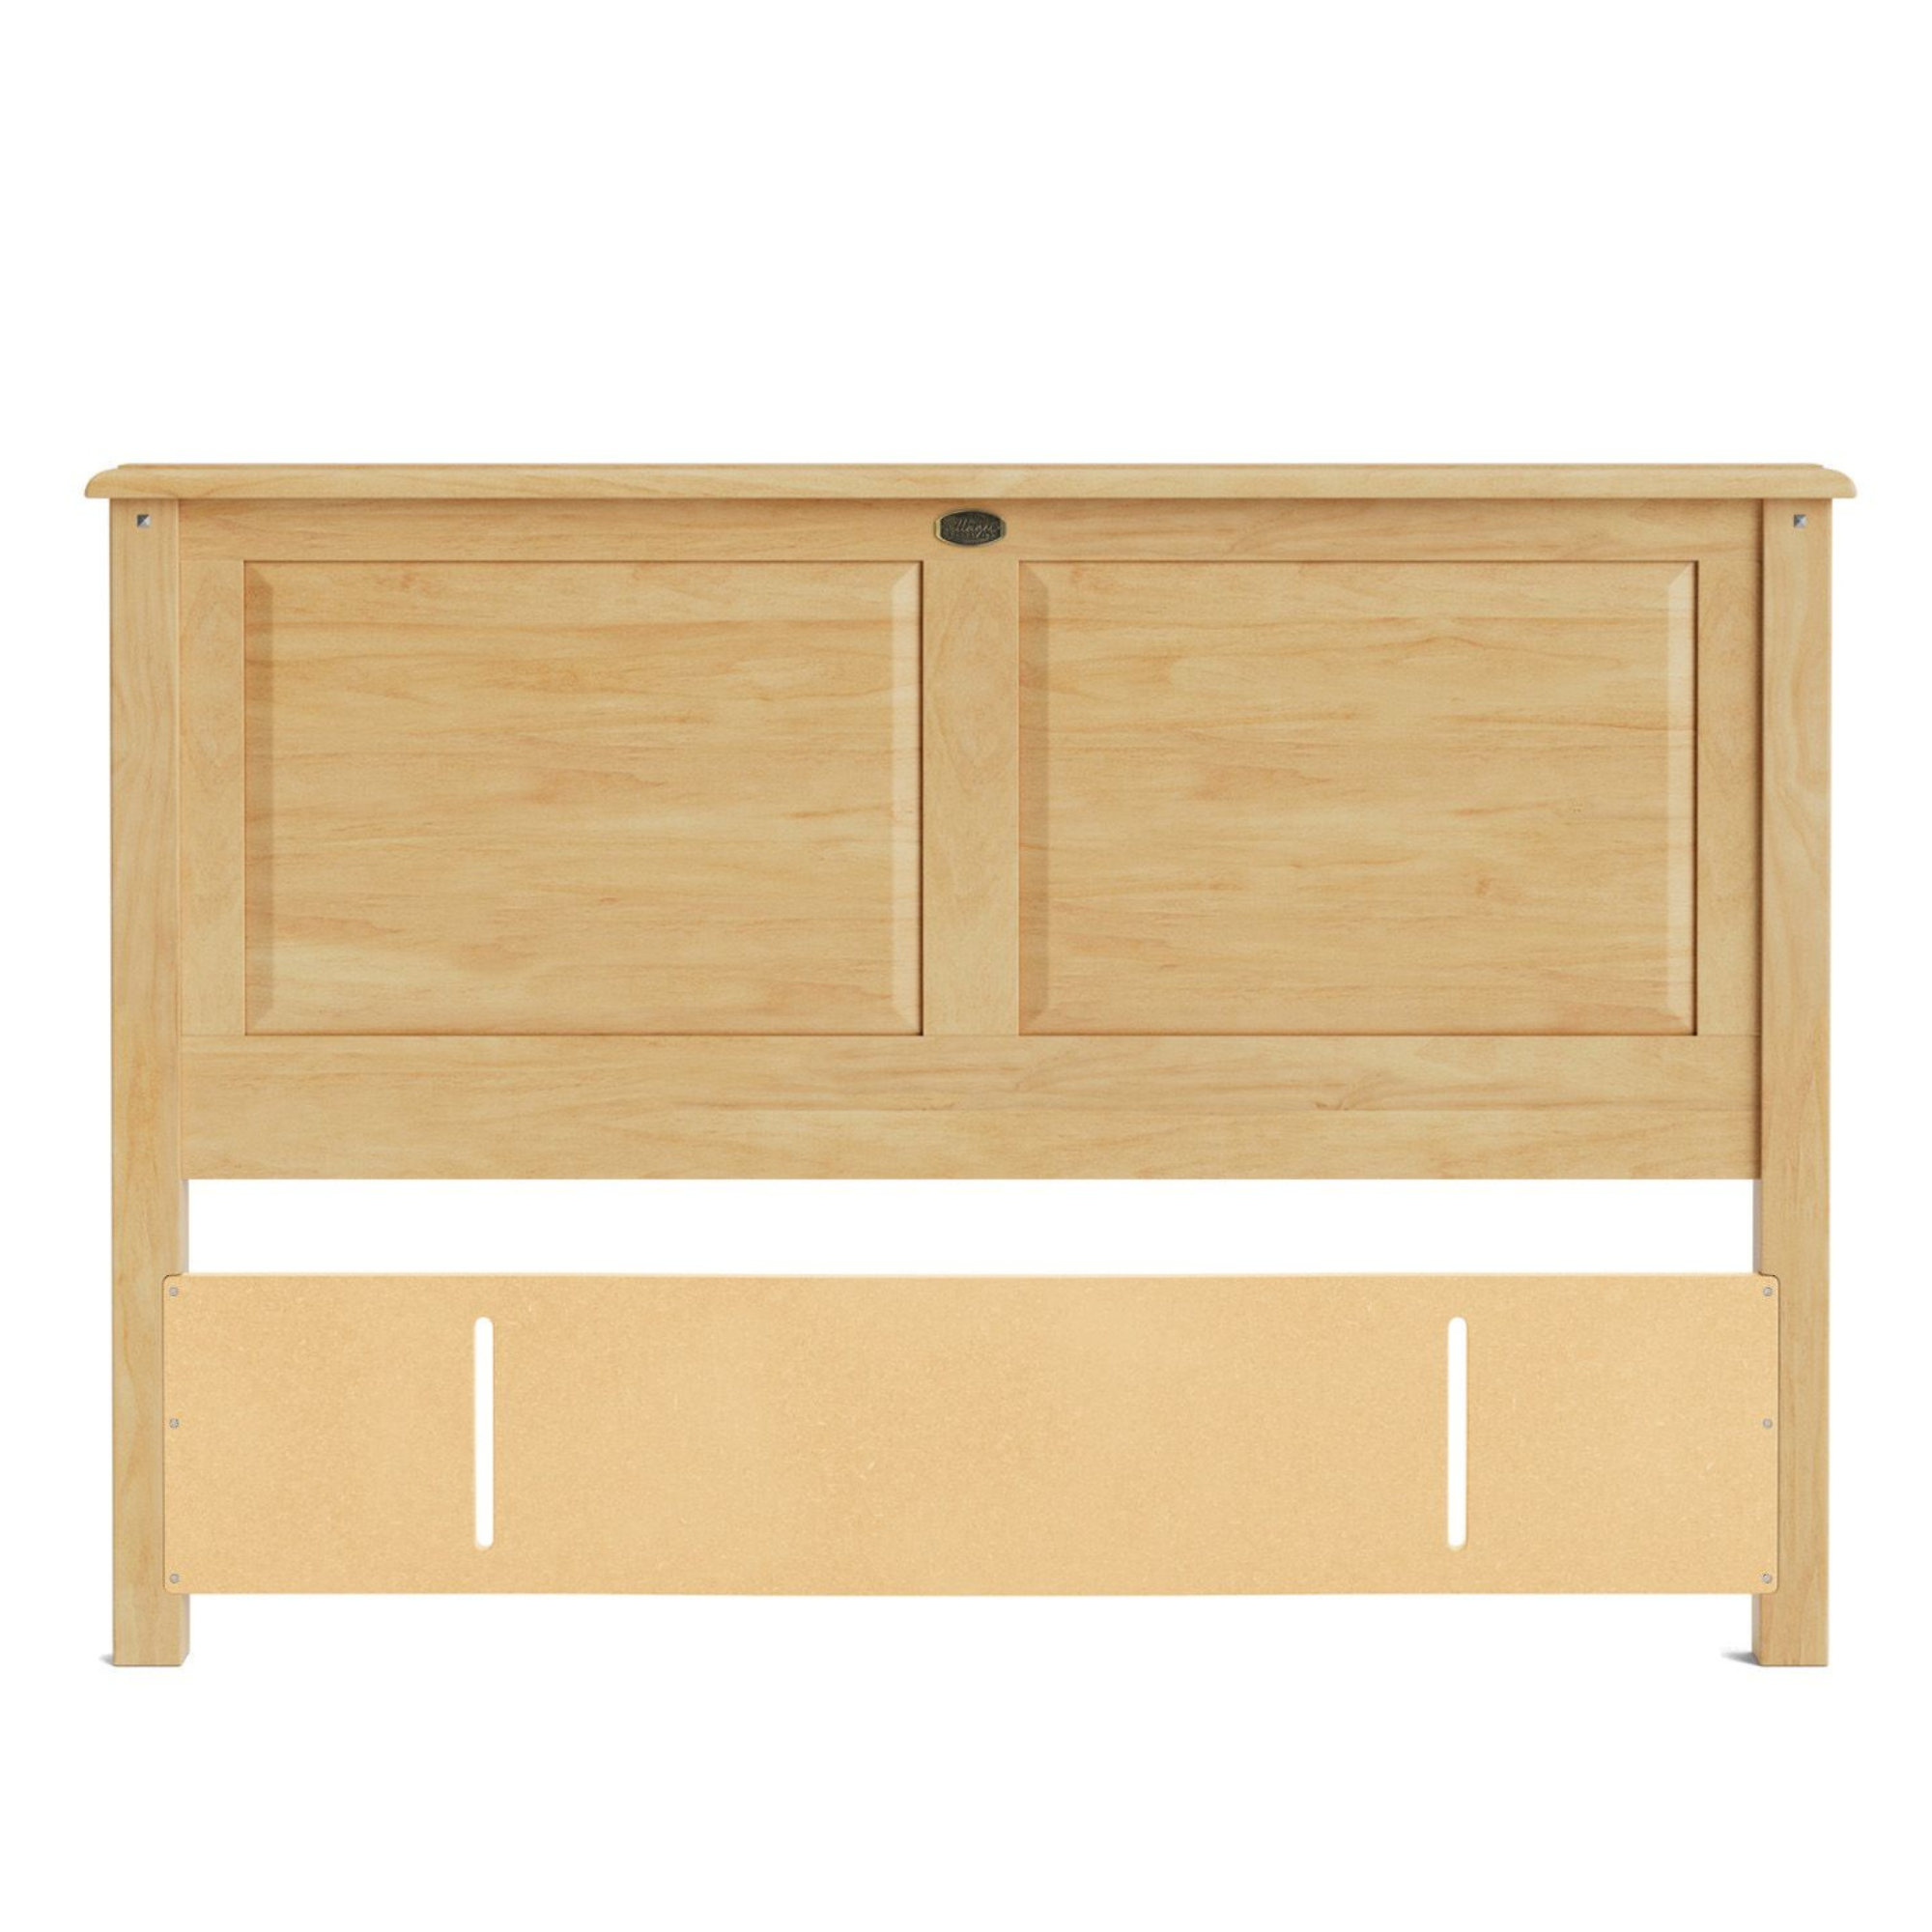 VILLAGER SOLID PANEL HEADBOARD | ALL SIZES | NZ MADE